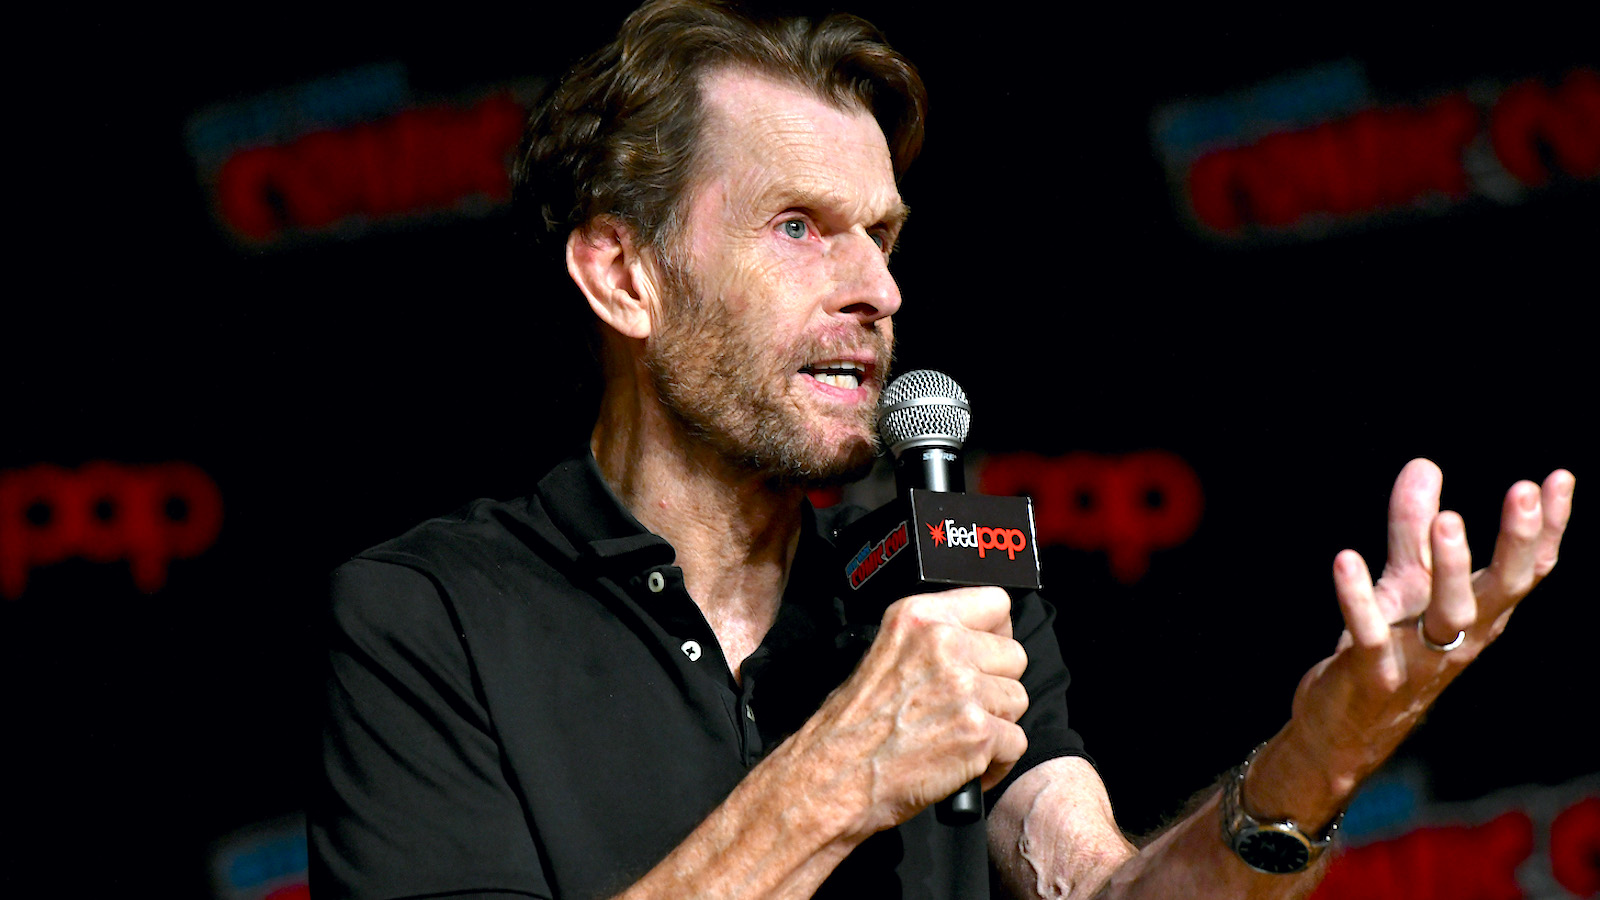 Kevin Conroy speaks into the microphone wearing a black polo shirt